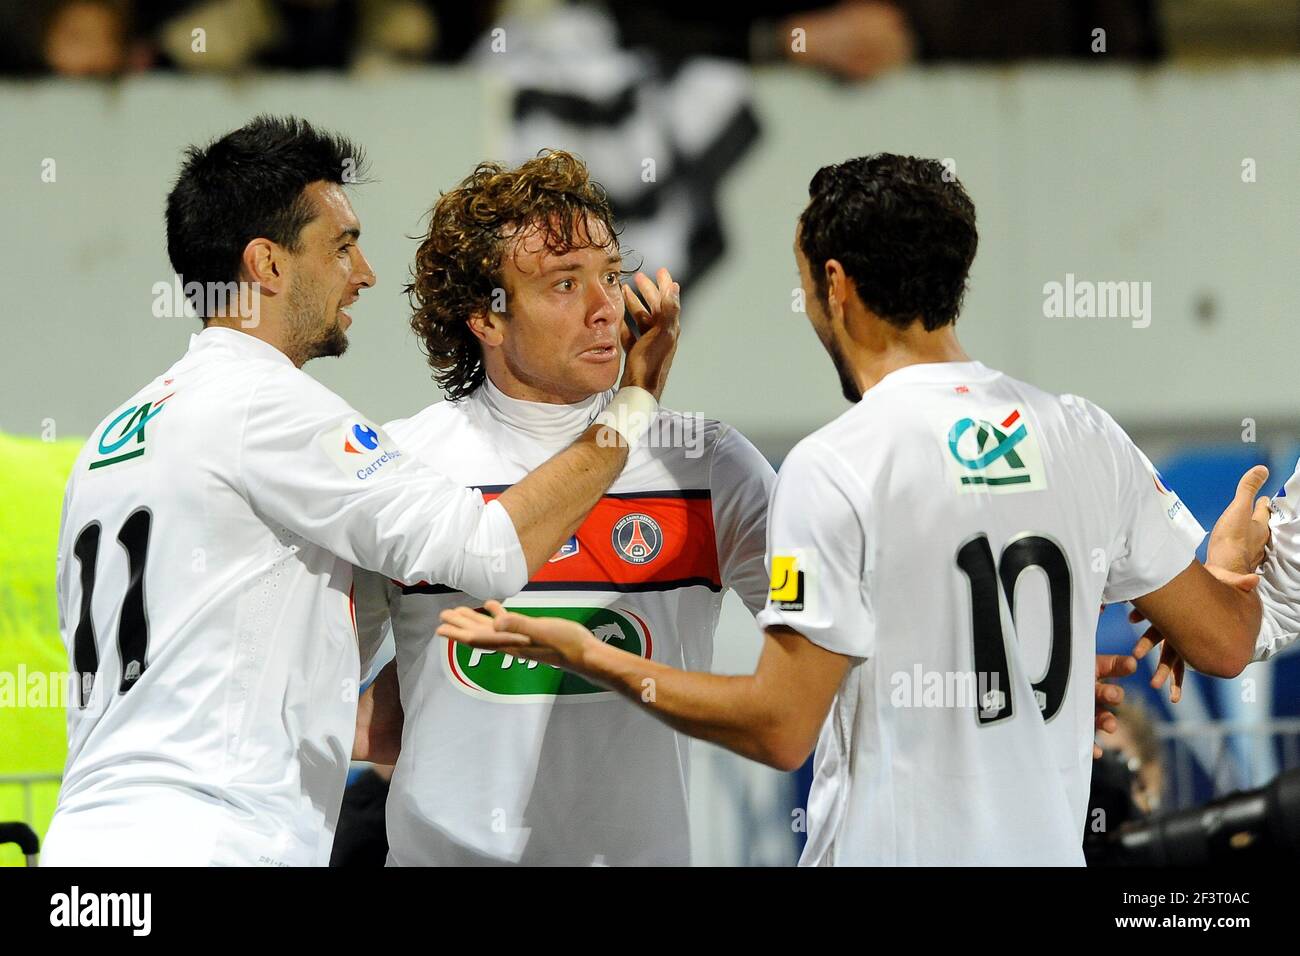 FOOTBALL - FRENCH CUP 2011/2012 - 1/32 FINAL - LOCMINE v PARIS SAINT GERMAIN - 8/01/2012 - PHOTO PASCAL ALLEE / DPPI - JOY DIEGO LUGANO (PSG) HE IS CONGRATULATED BY JAVIER PASTORE (L), NENE (R) Stock Photo